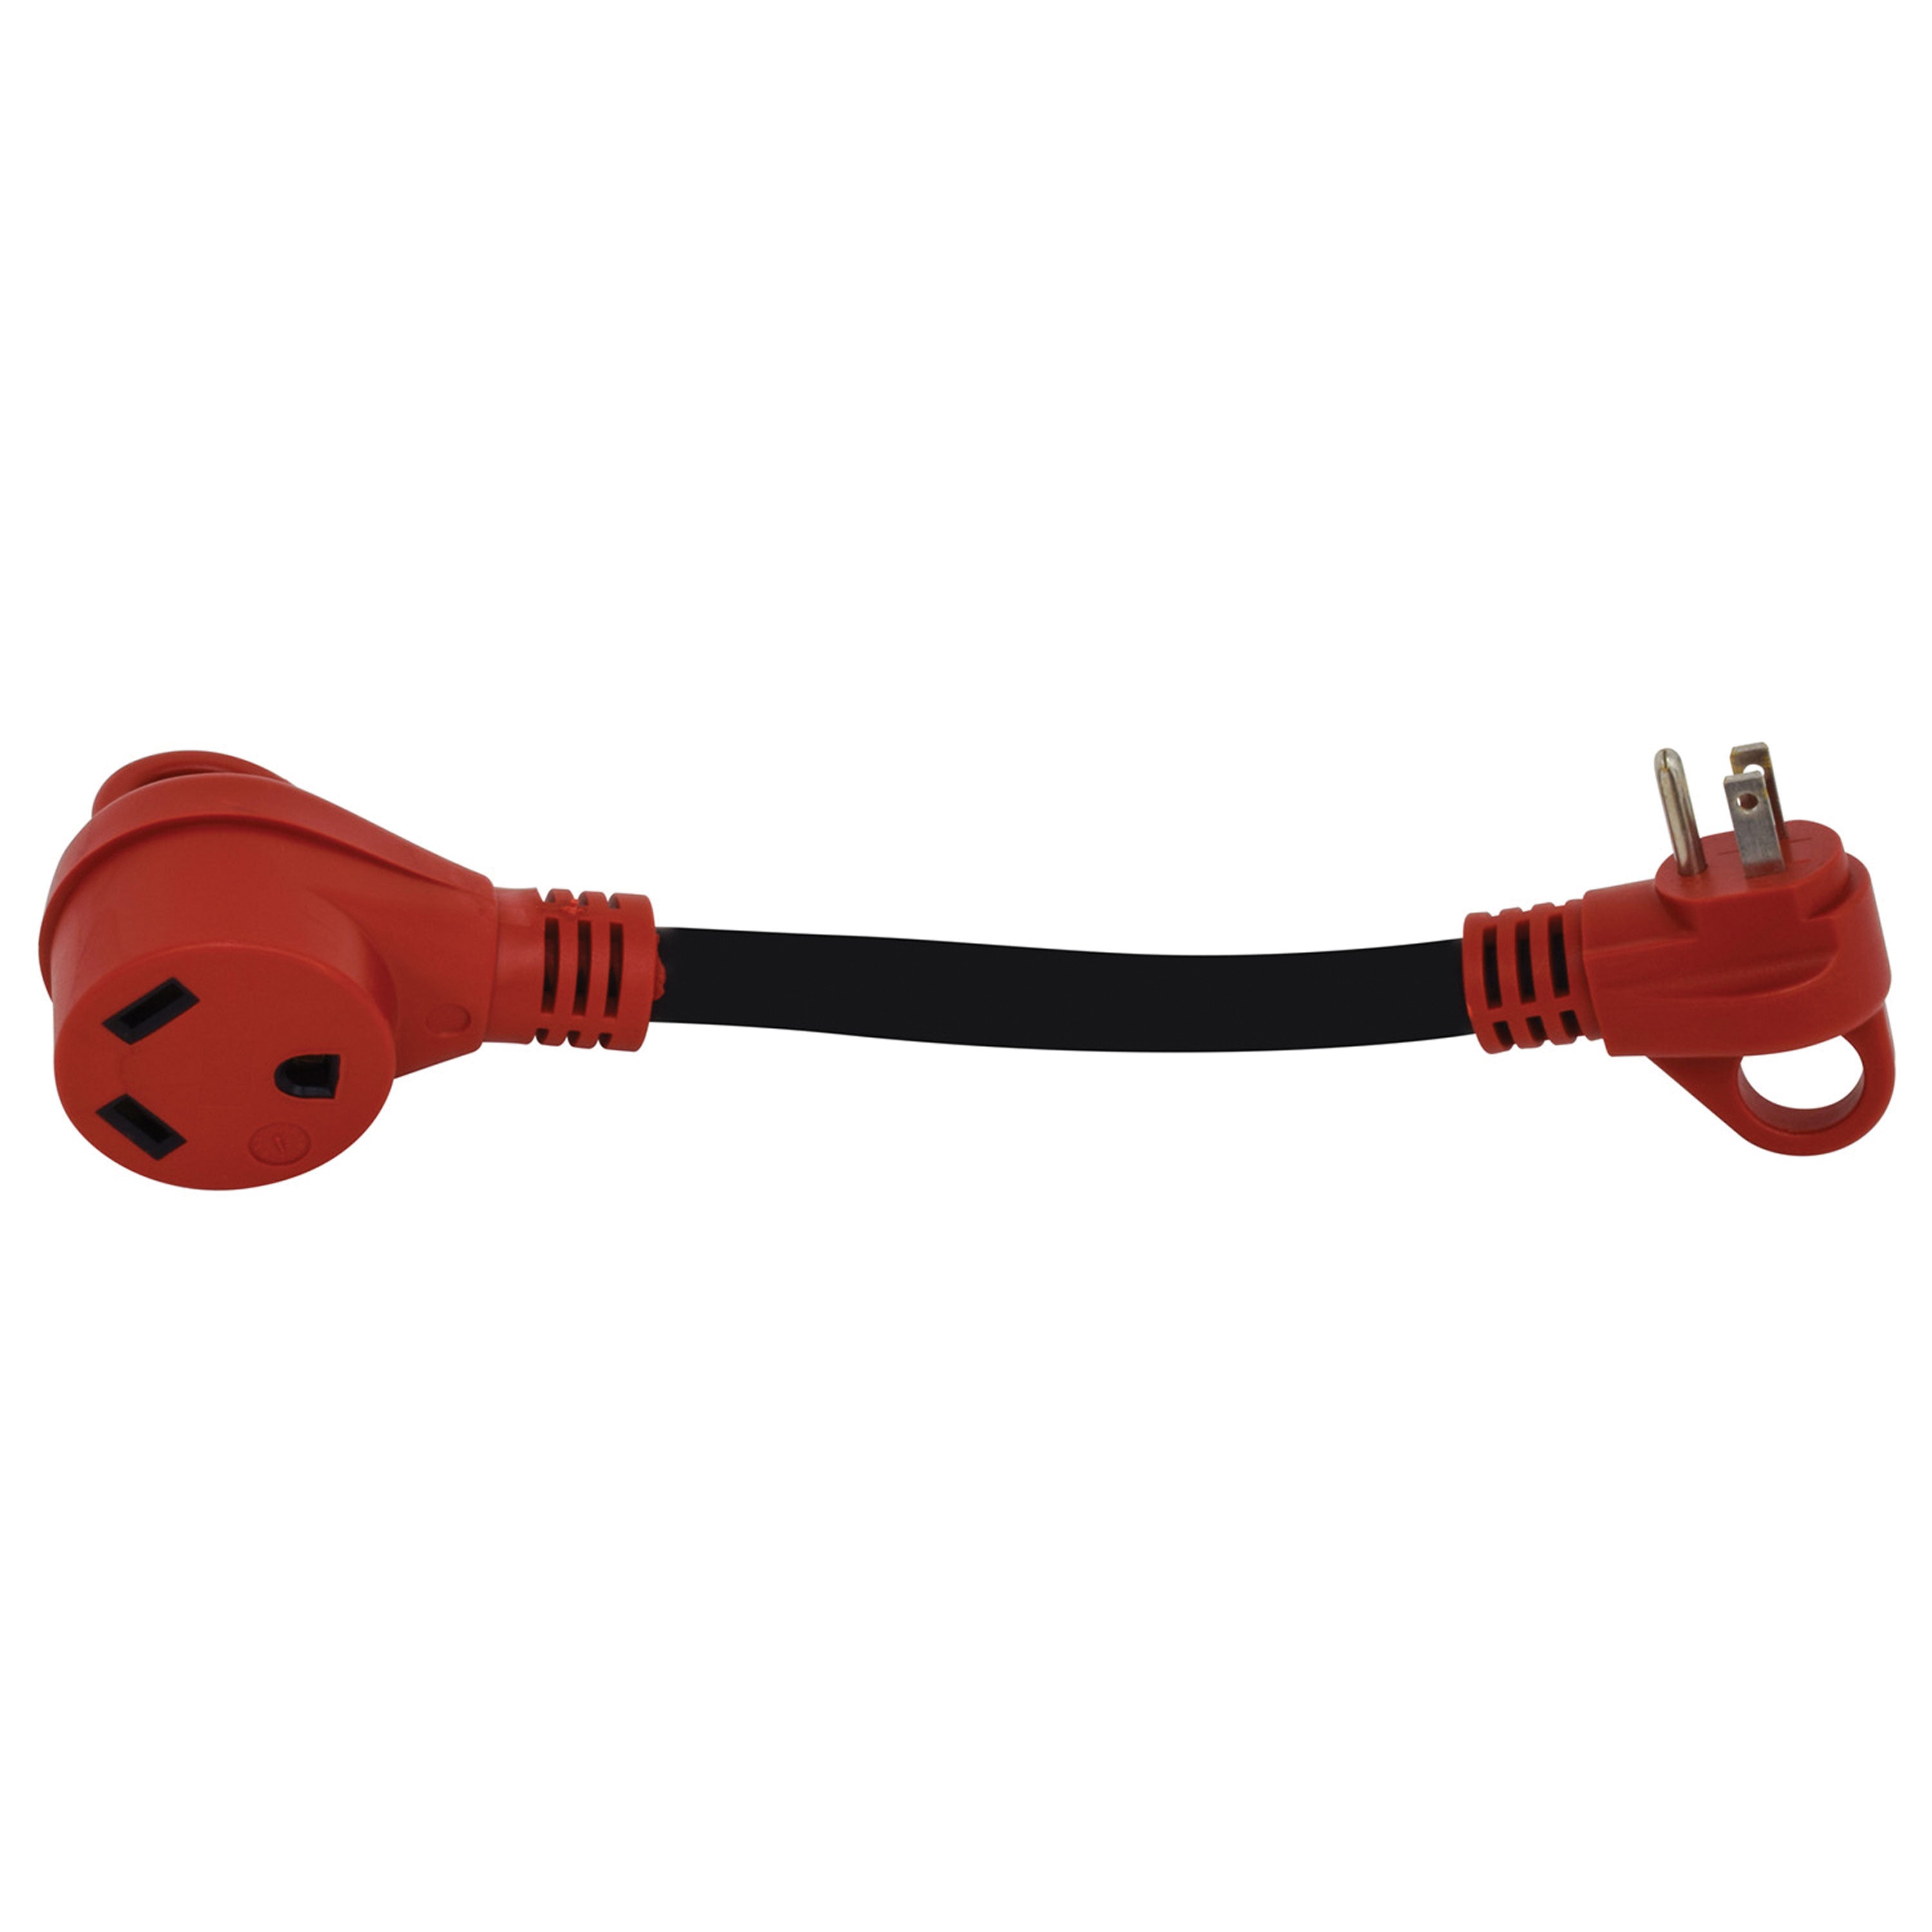 Valterra A10-1530Hvp Mighty Cord 12 Adapter Cord W/Handle - 15Am To 30Af Red (Carded)